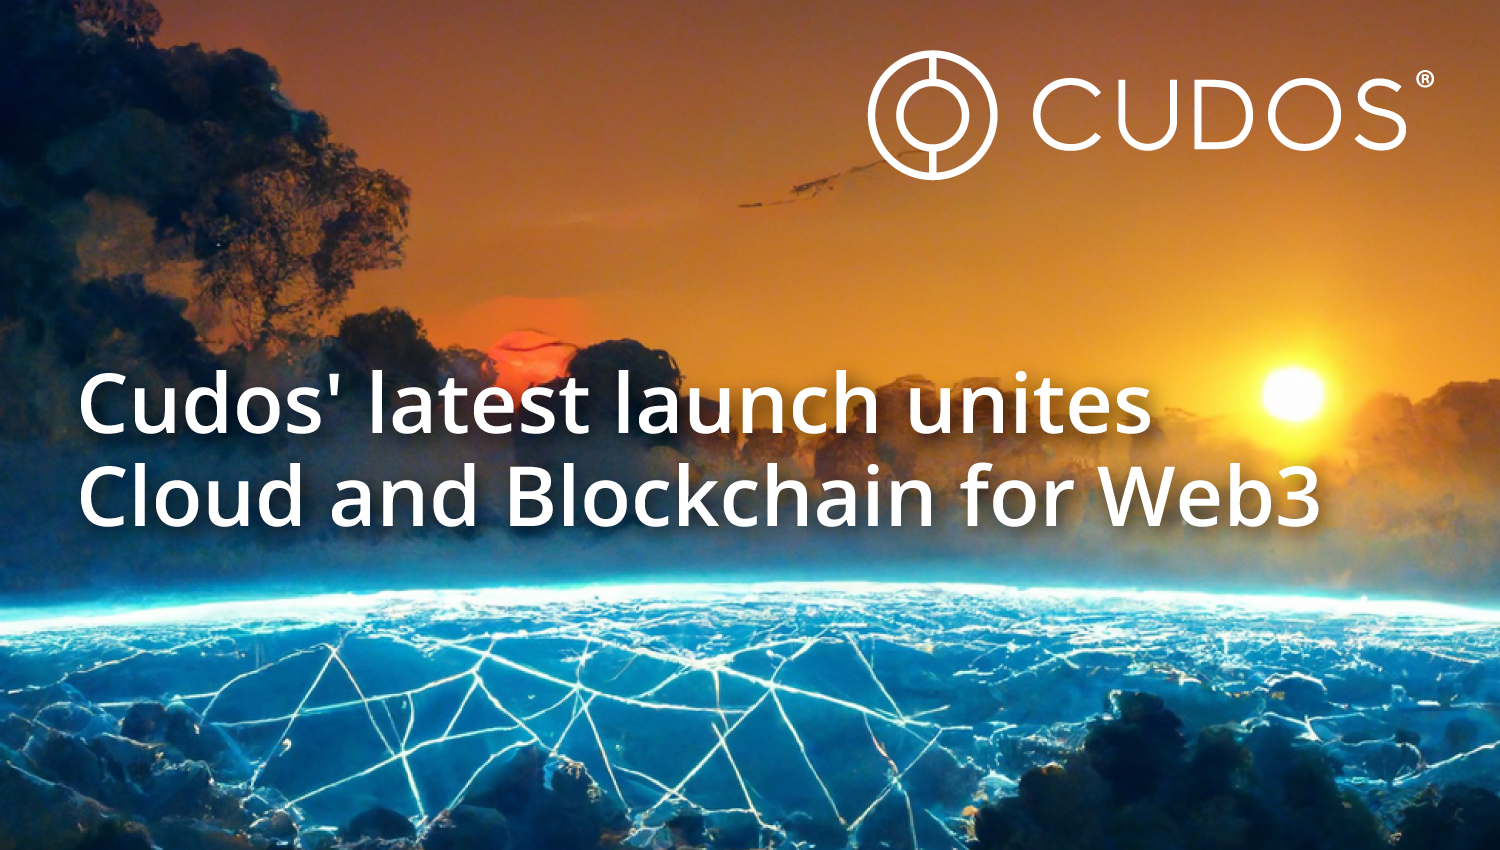 Cudos’ latest launch unites Cloud and Blockchain for Web3